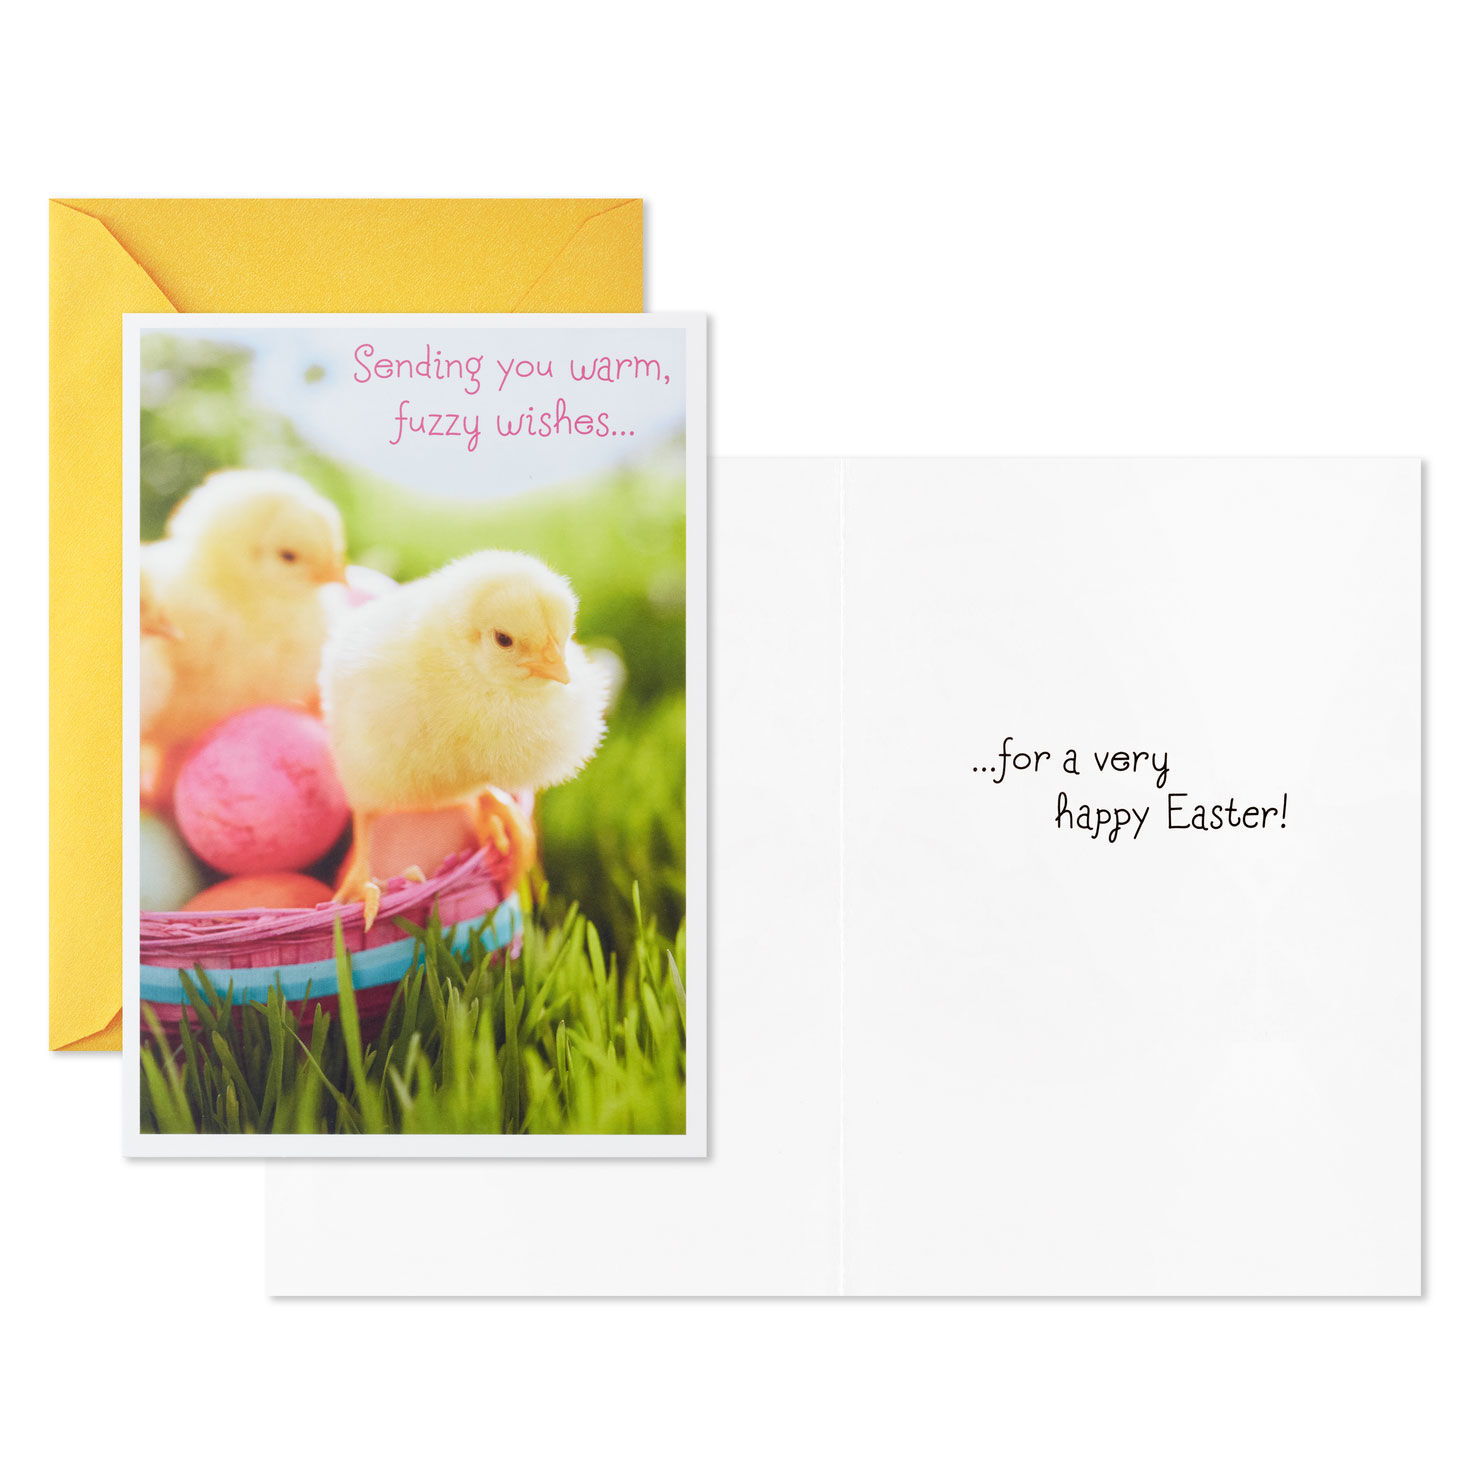 25 new Easter cards assorted 